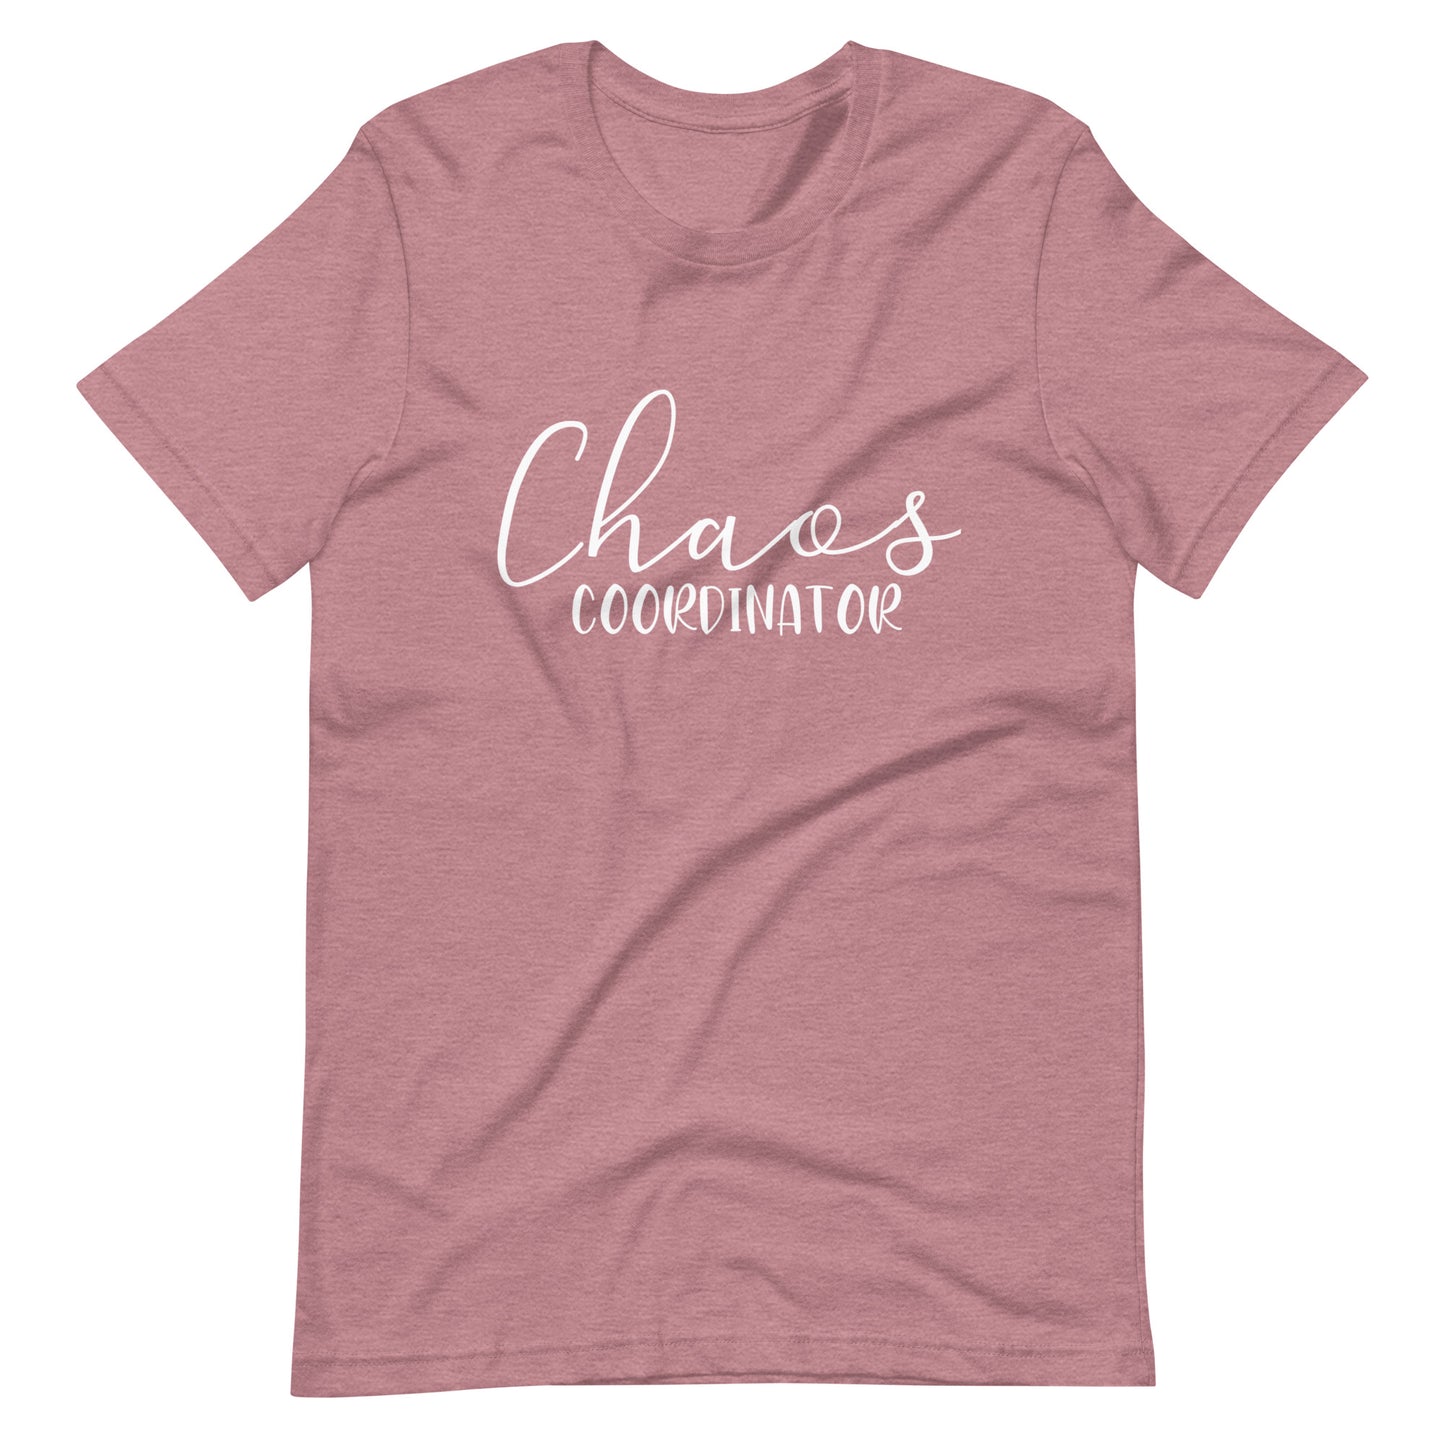 Chaos Coordinator T-shirt in heather orchid with white lettering